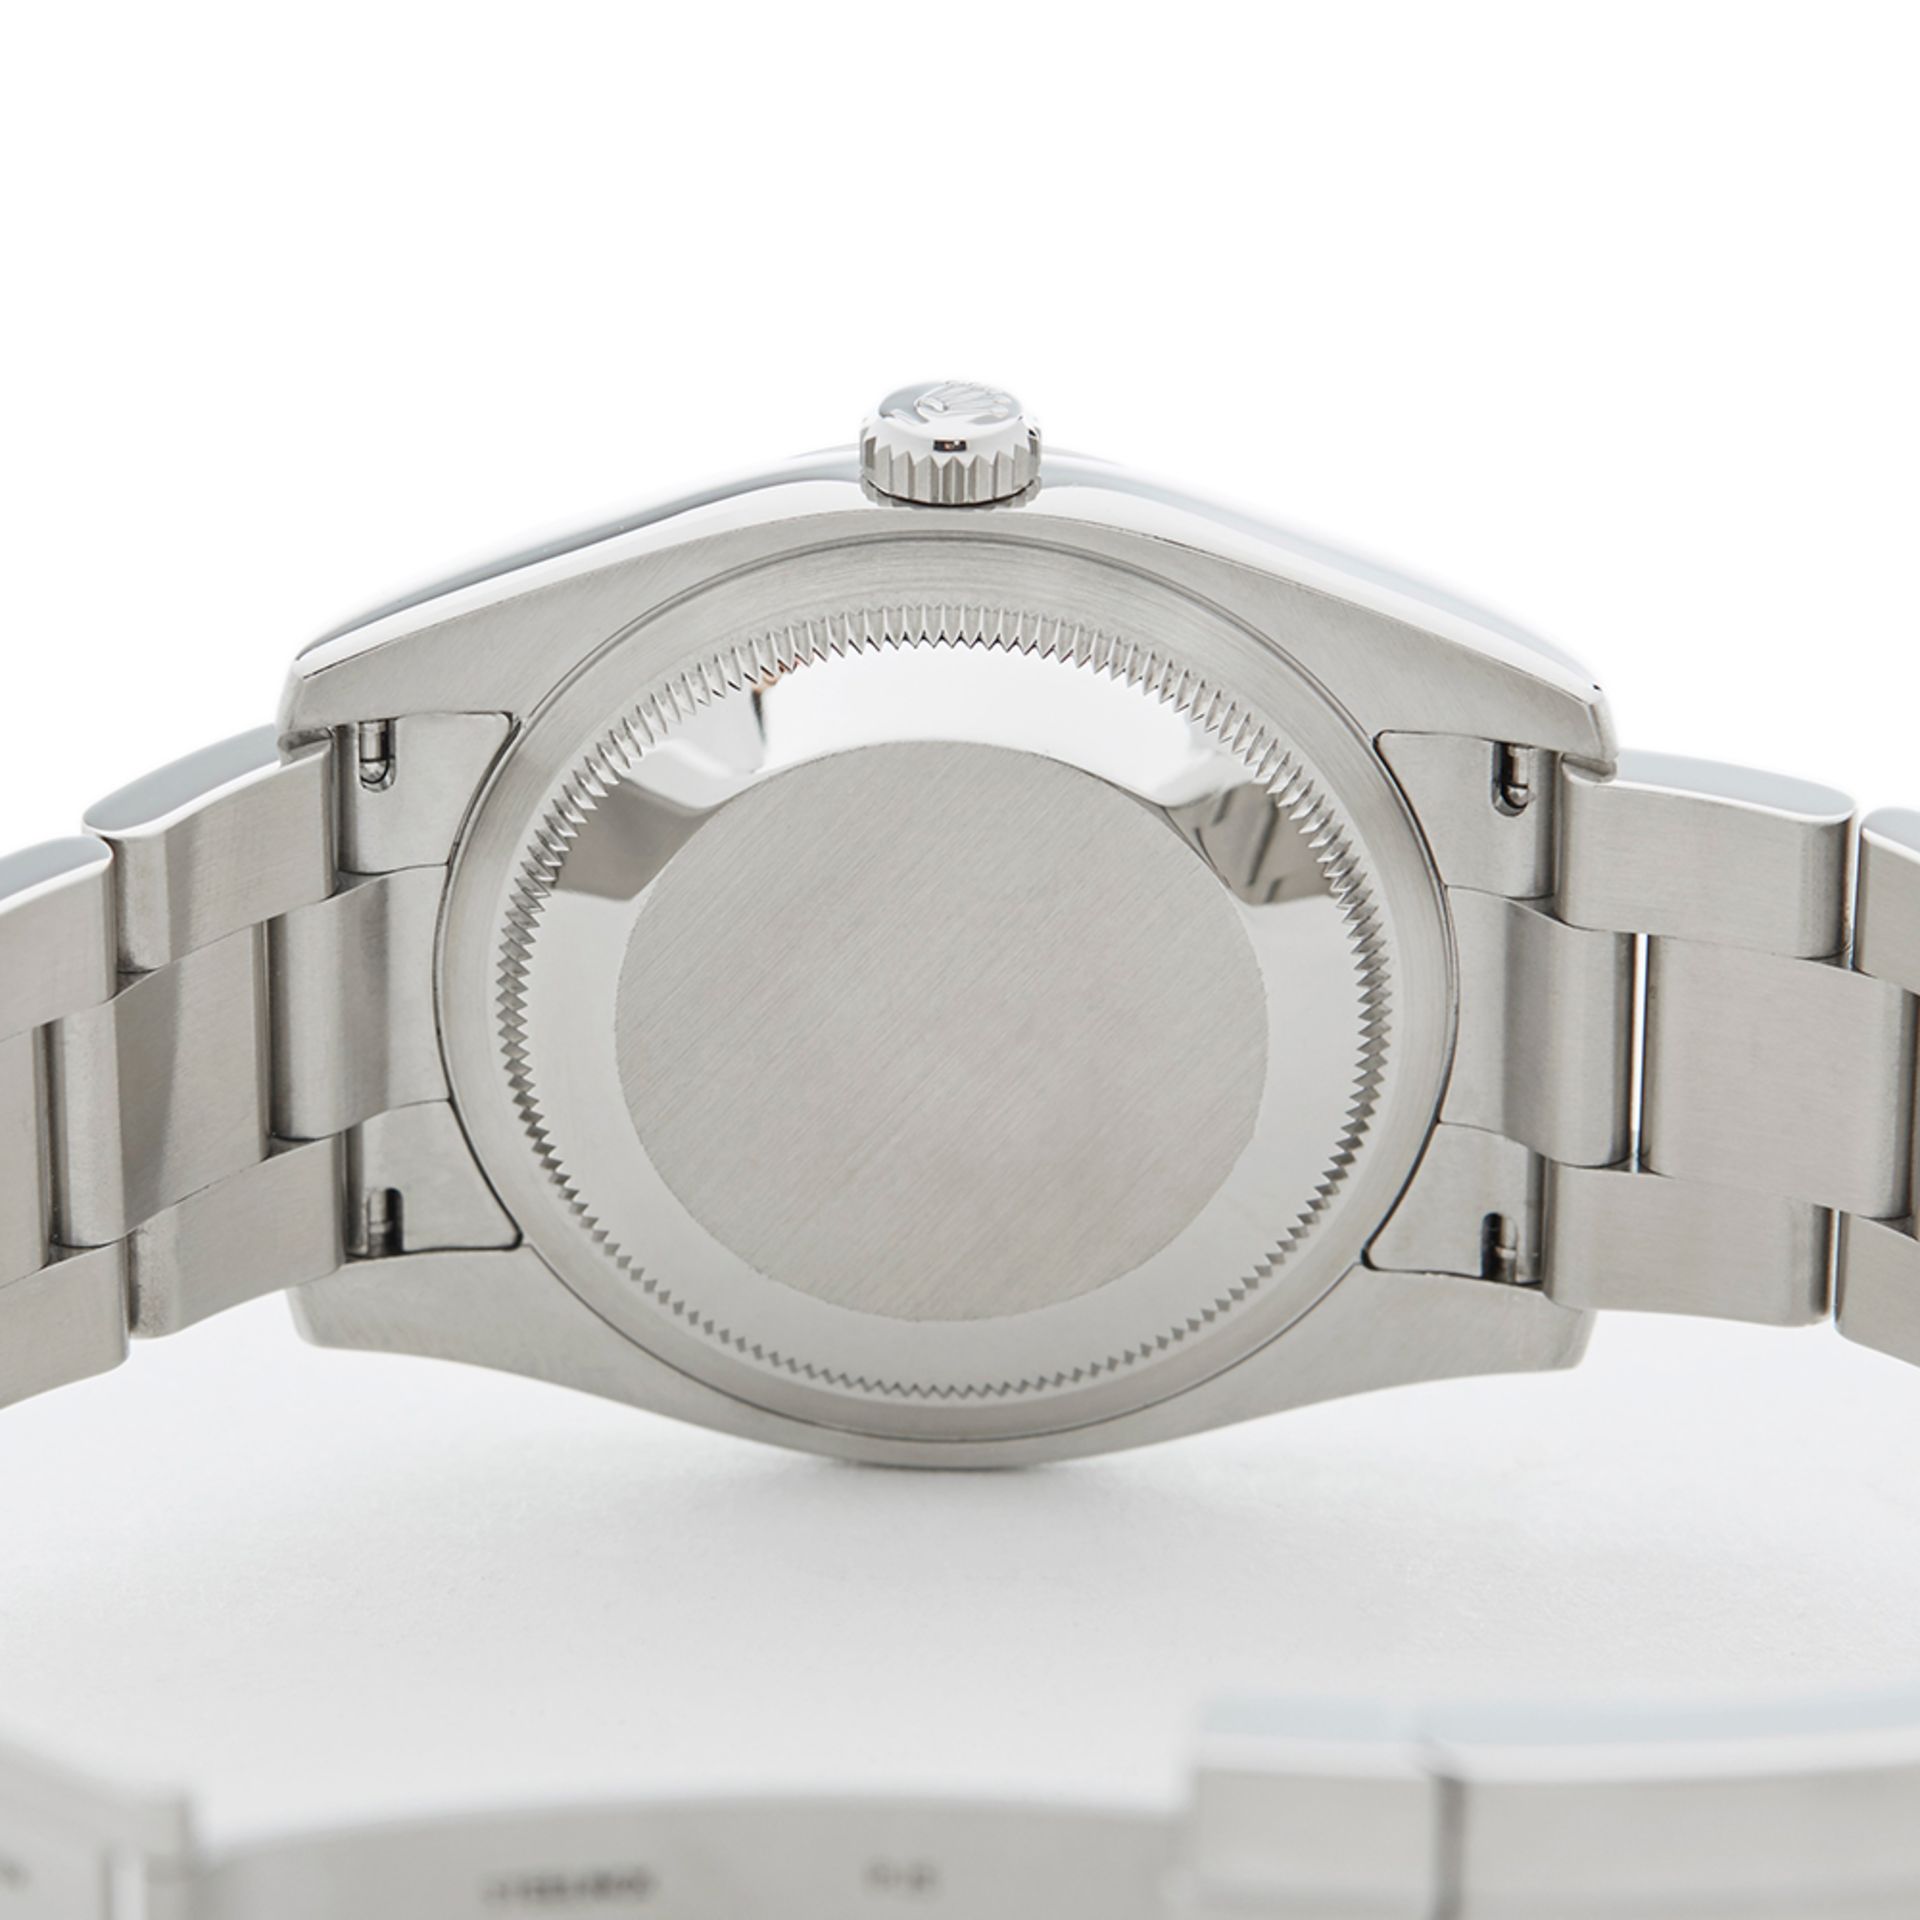 Rolex Oyster Perpetual 36mm Stainless Steel 116000 - Image 8 of 9